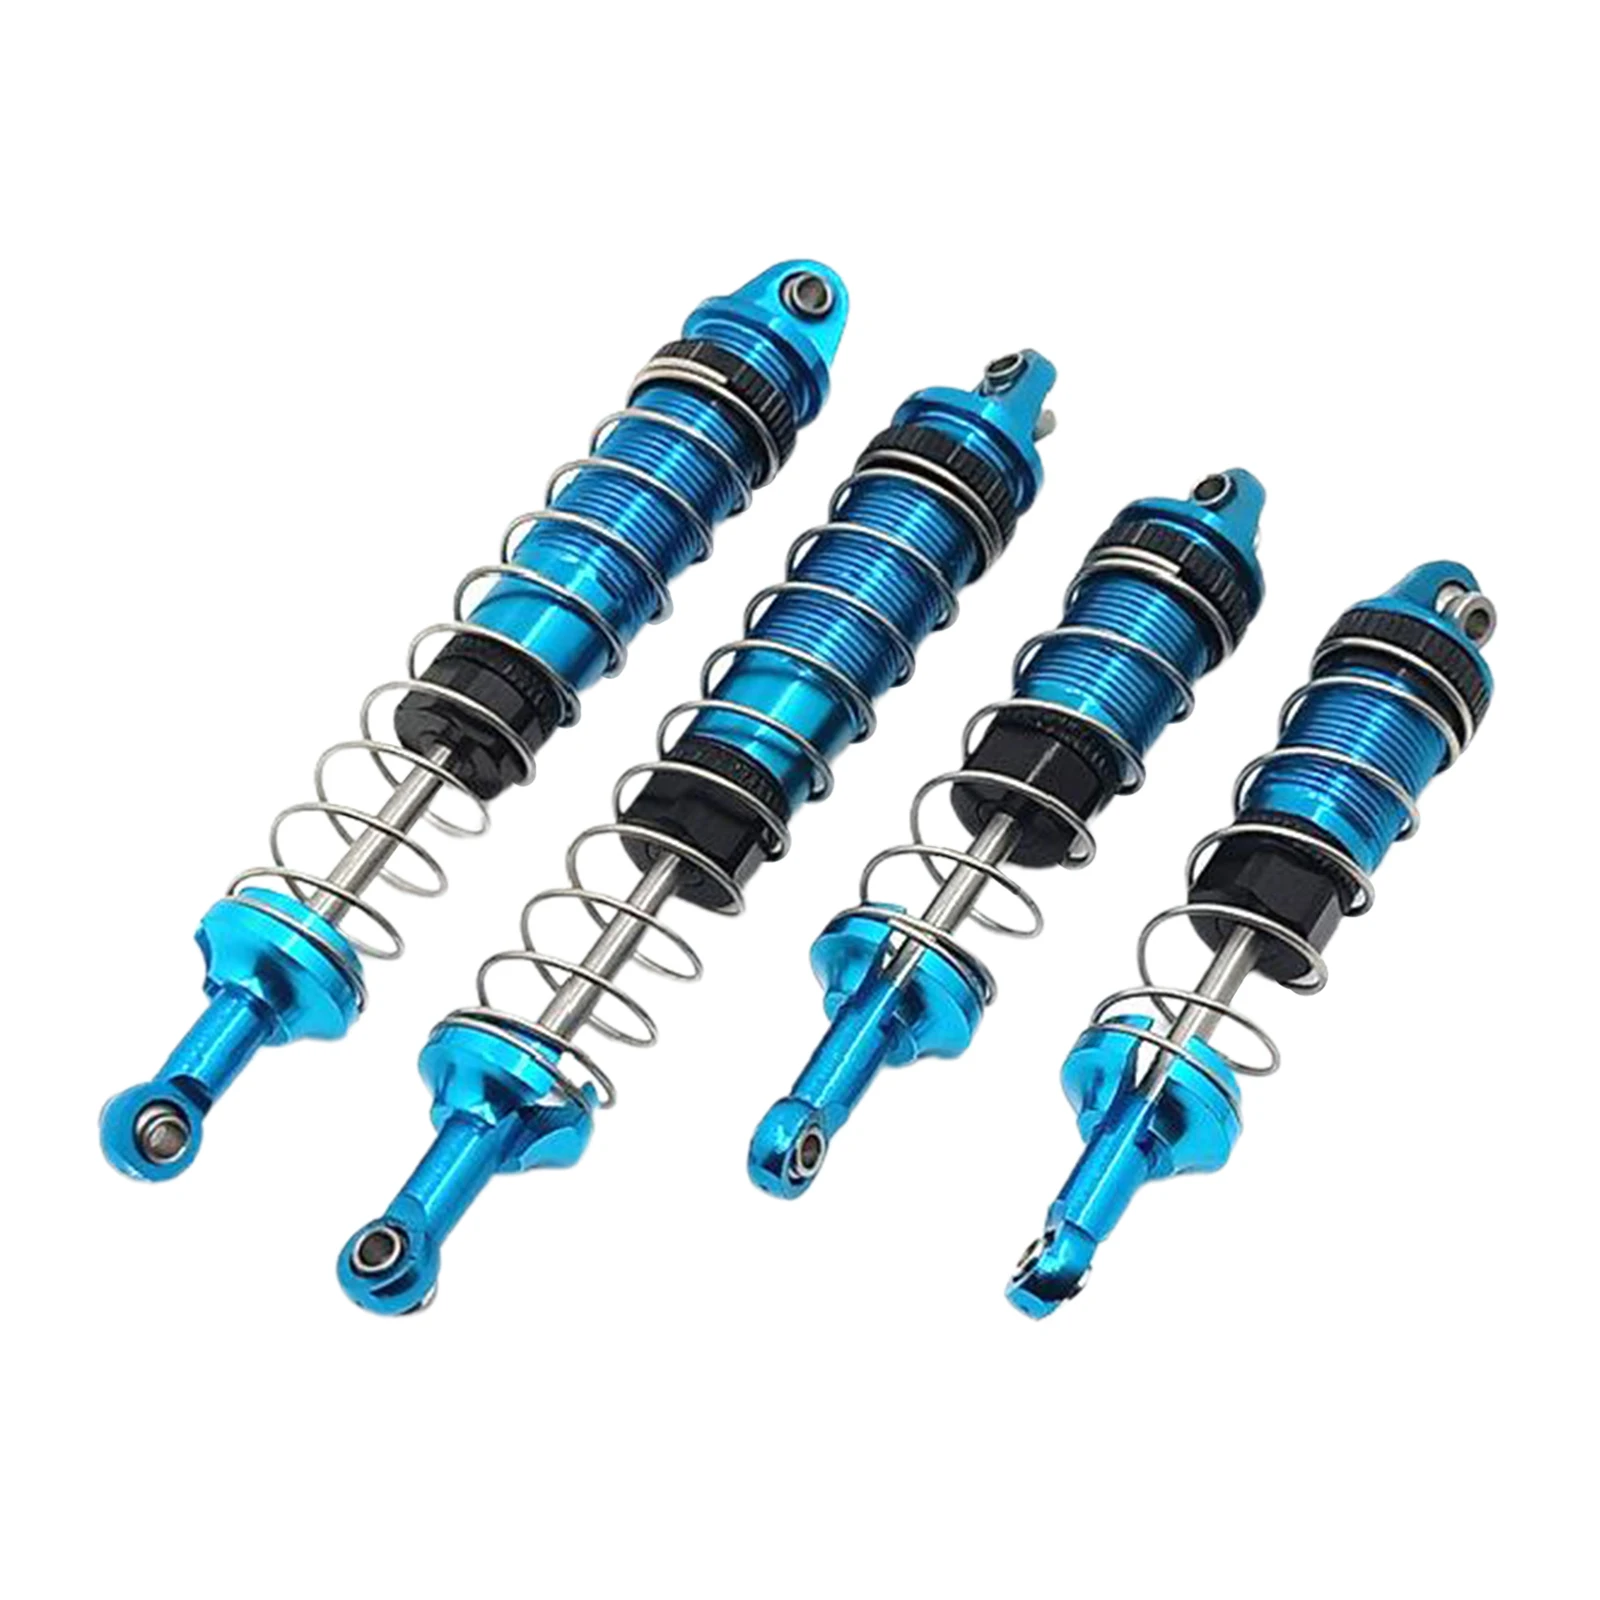 Front/Rear Shock Absorber for WLtoys 12428 1:12 RC Rock Short Course Truck Car Vehicle Model Accessory 74mm/97.5mm enlarge